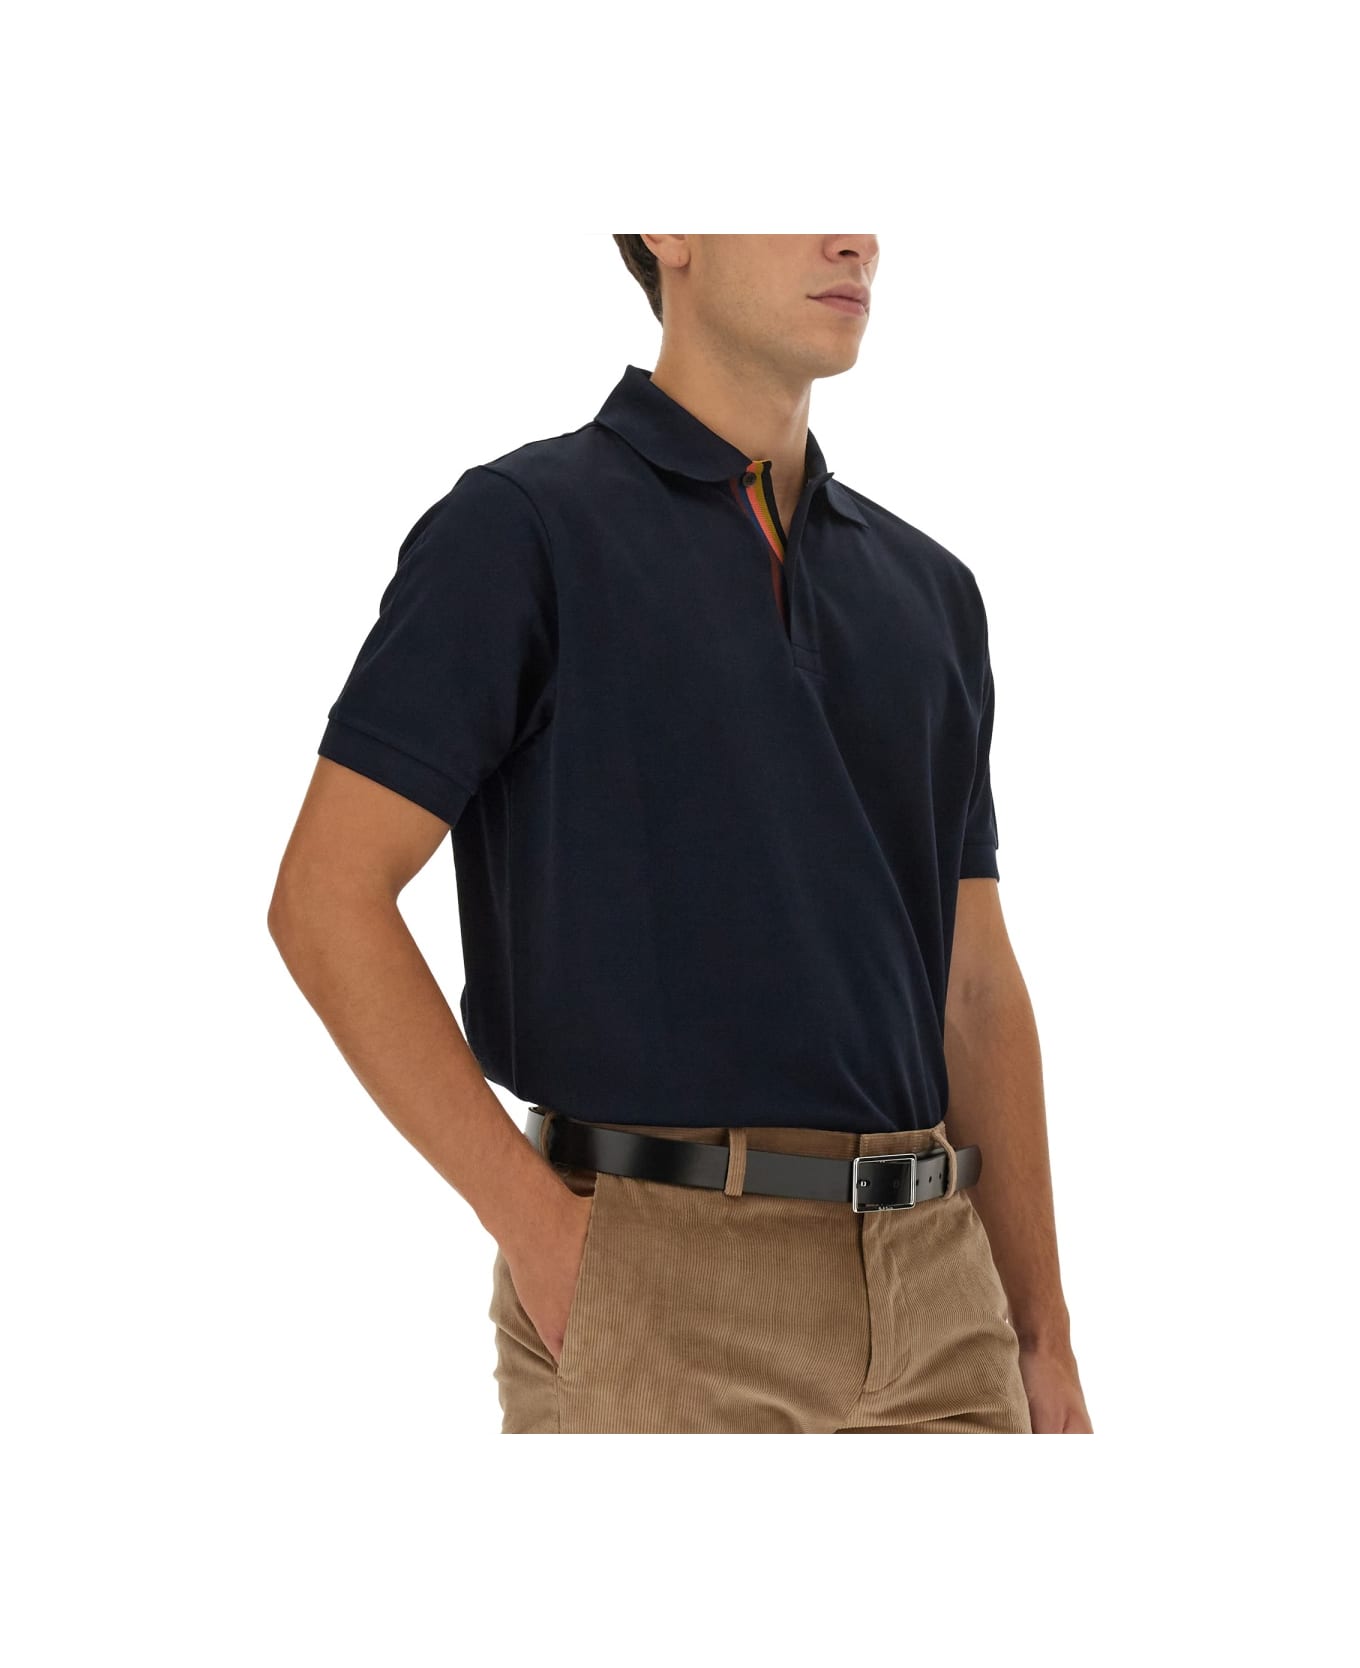 Paul Smith Regular Fit Polo Shirt - BLUE ポロシャツ